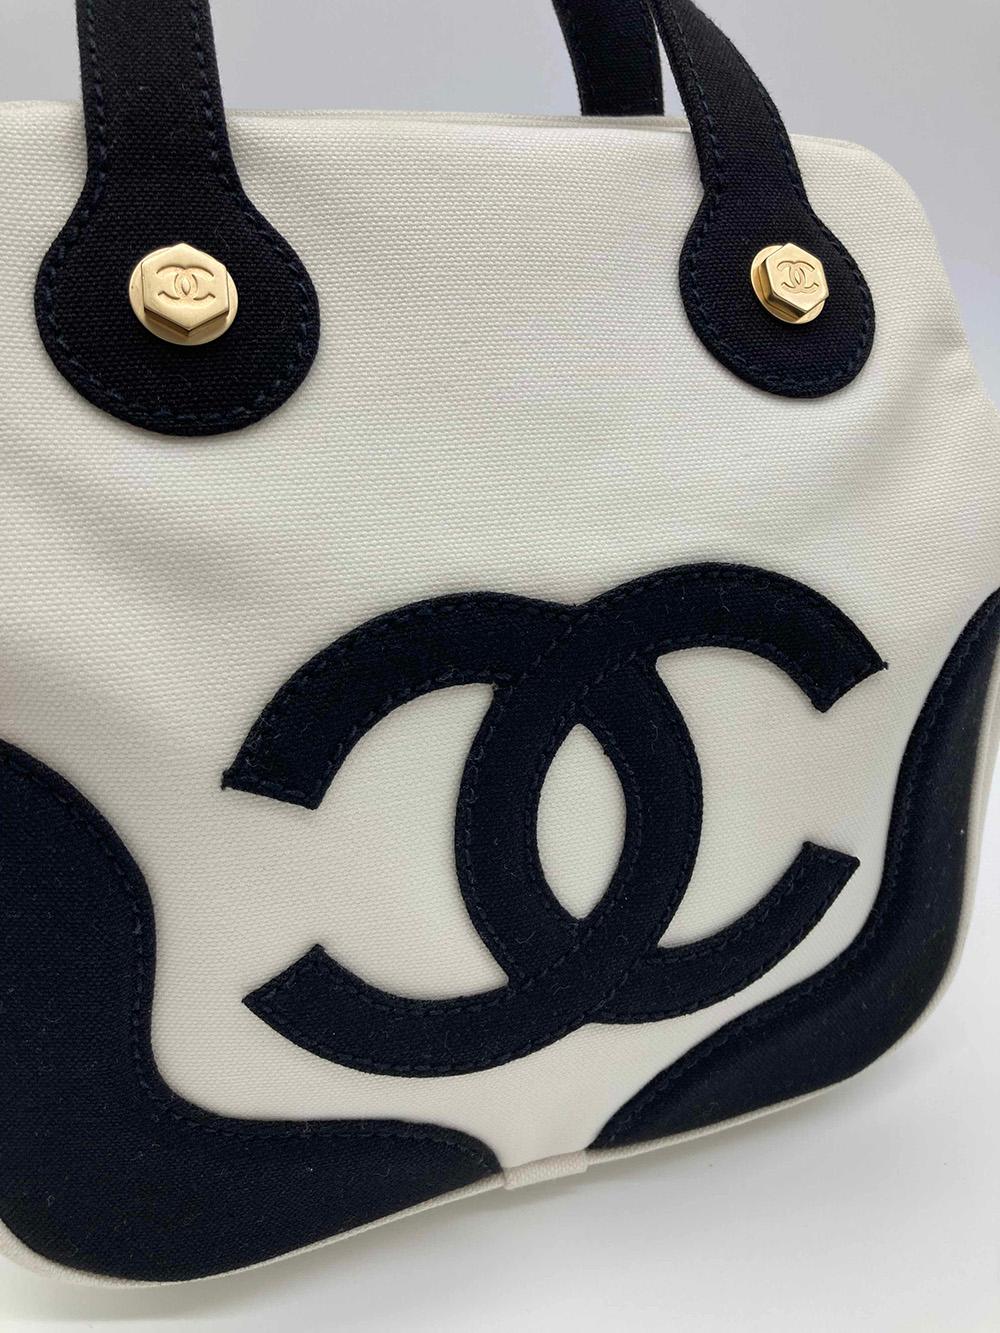 Women's Chanel Black and White Canvas Marshmallow Bag